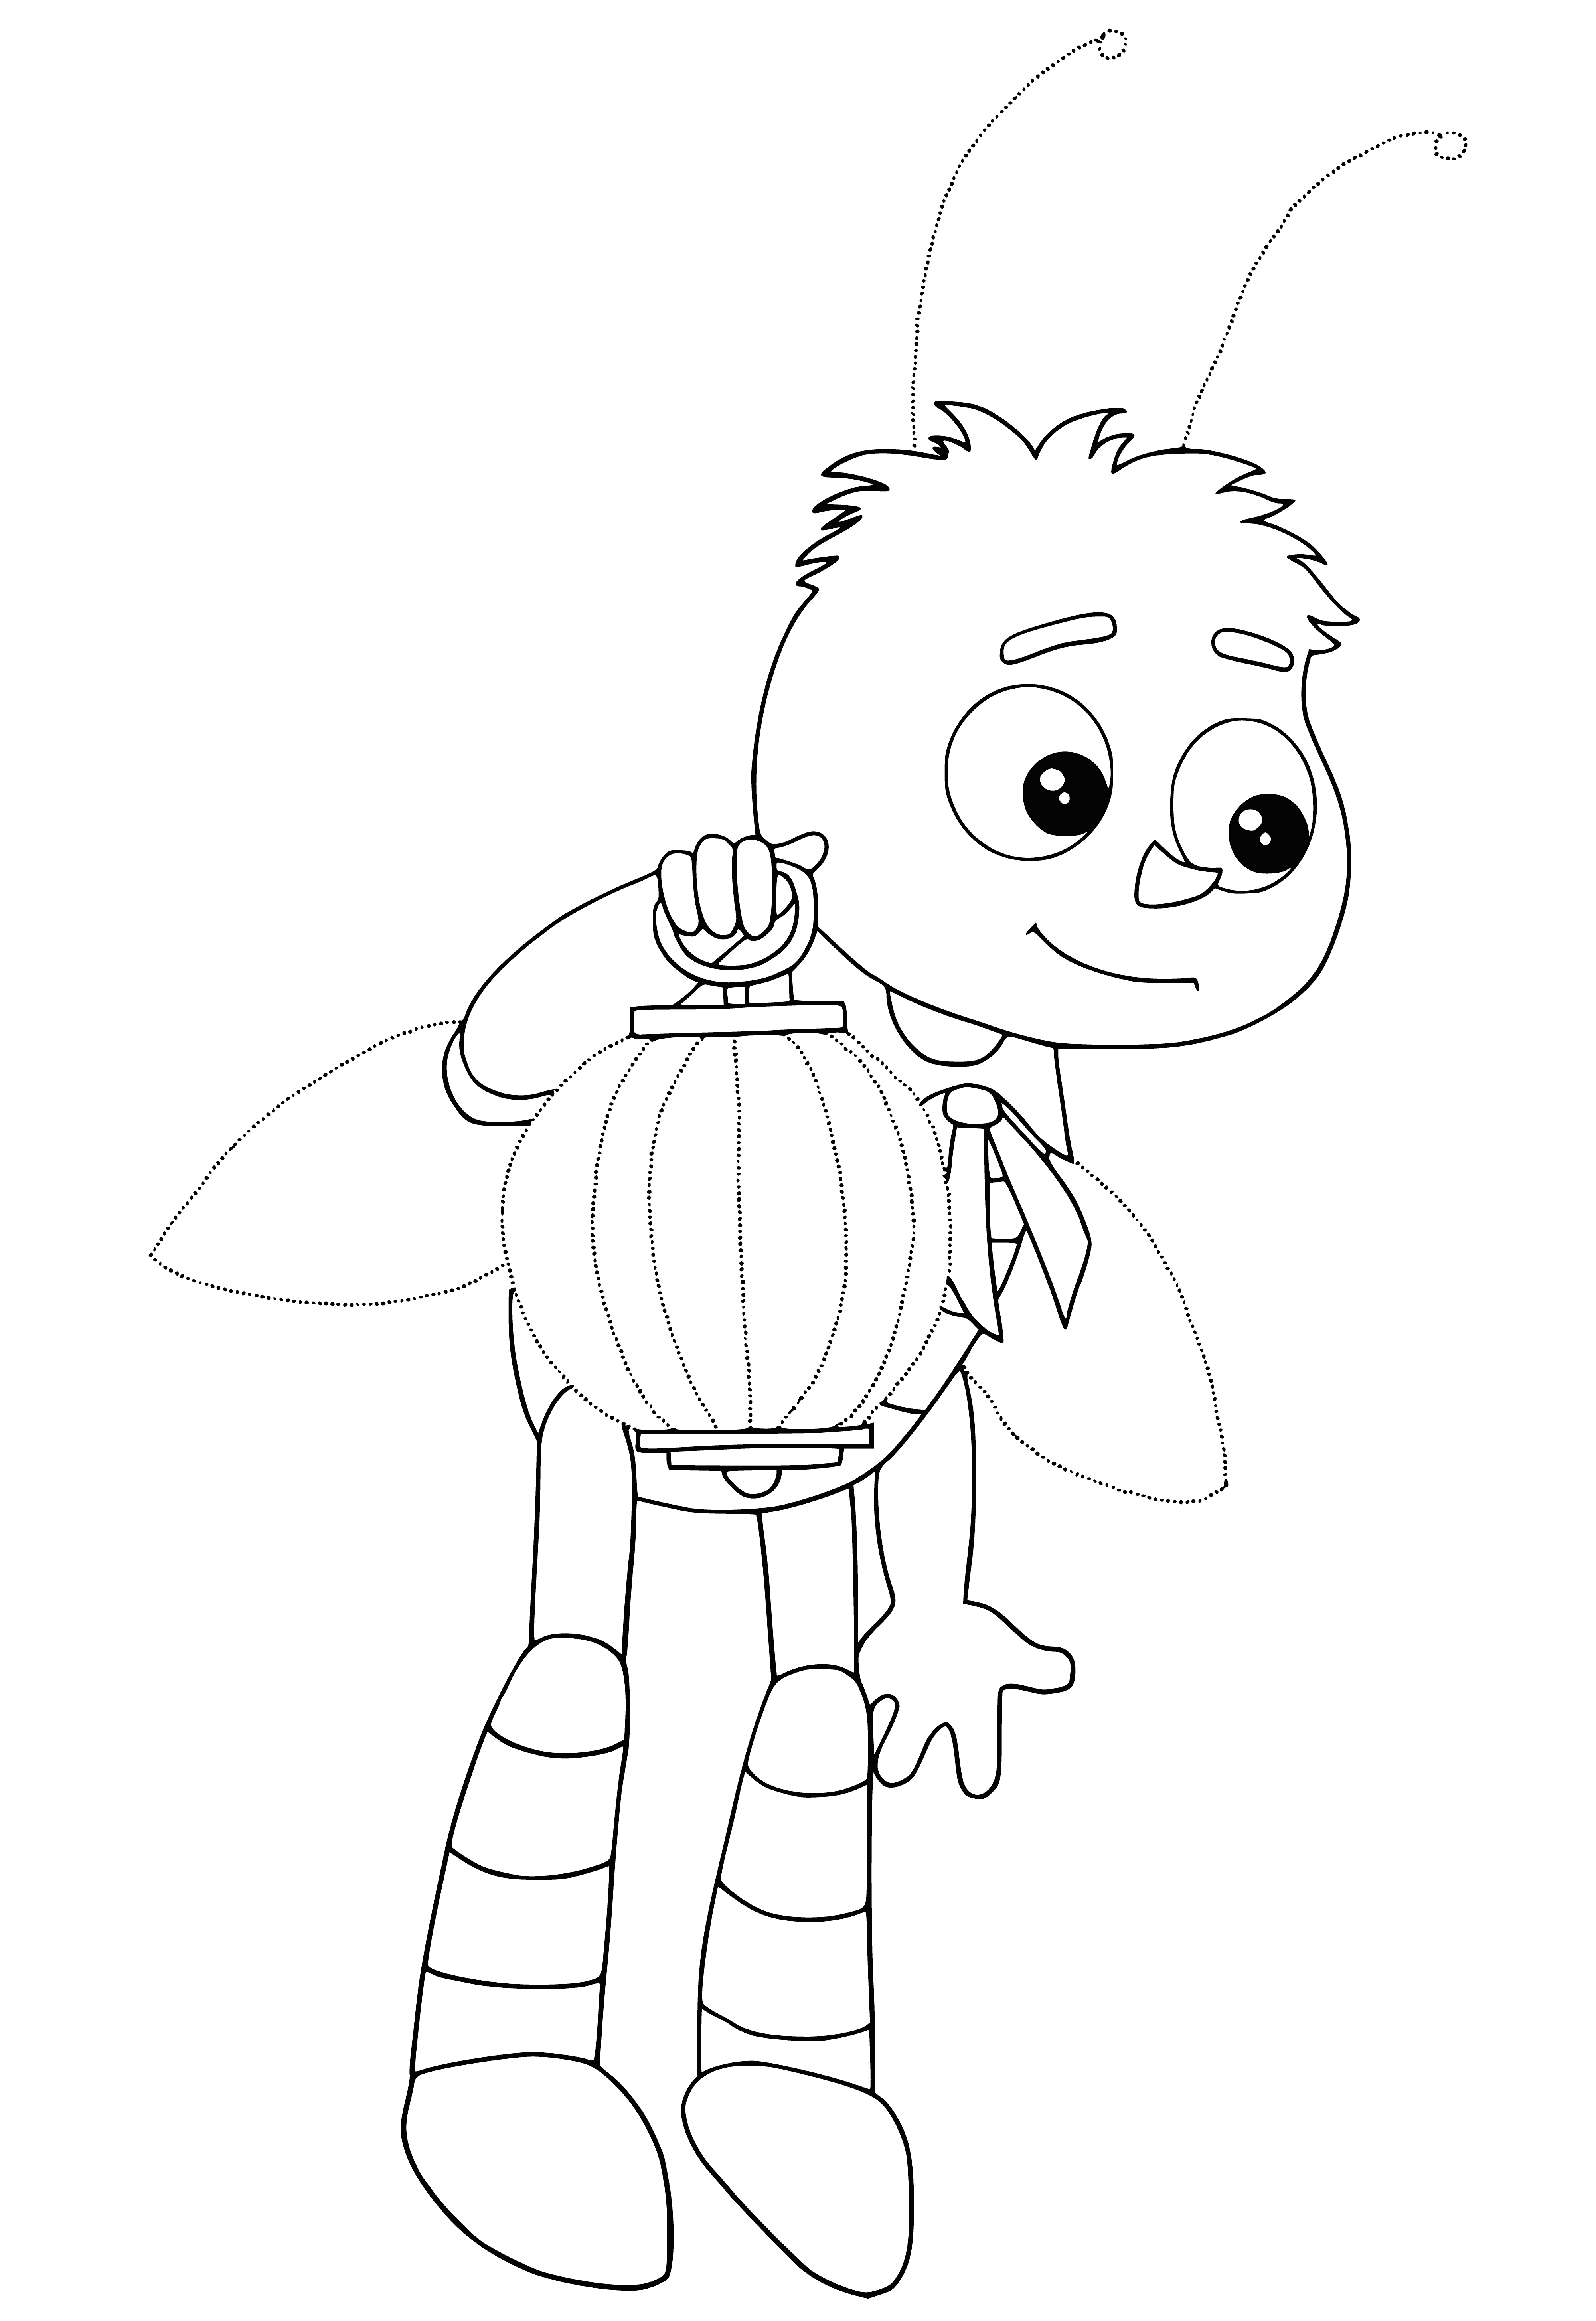 coloring page: Four happy, content creatures - one with a honeycomb - surround a small, chubby one with big eyes in a coloring page.